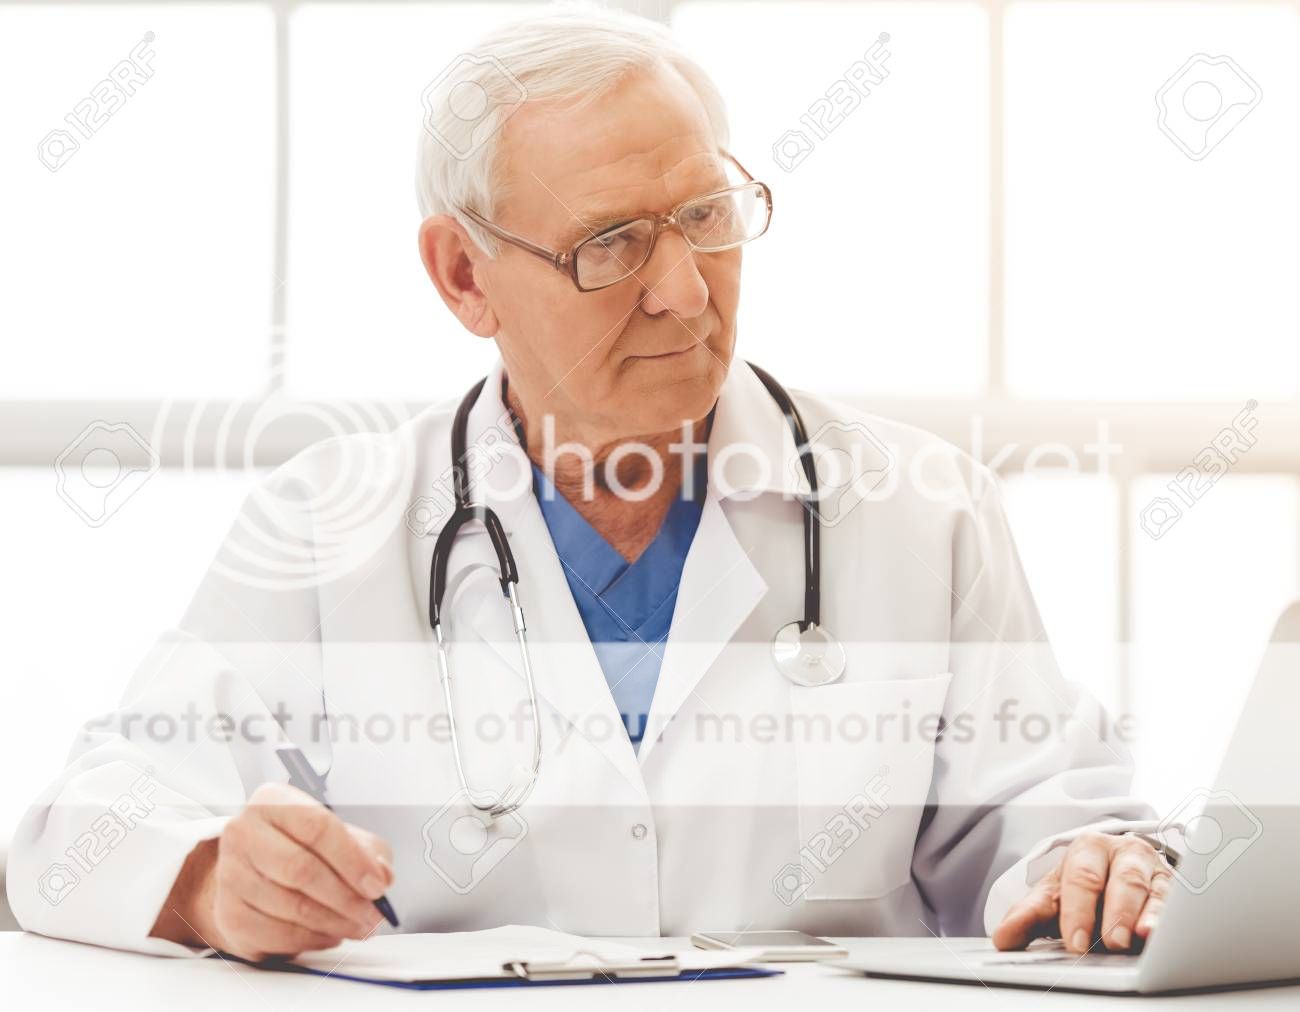  photo 65186969-handsome-old-doctor-in-white-medical-coat-and-eyeglasses-is-using-a-laptop-making-notes-and-smiling-_zpsjq3zyvuu.jpg